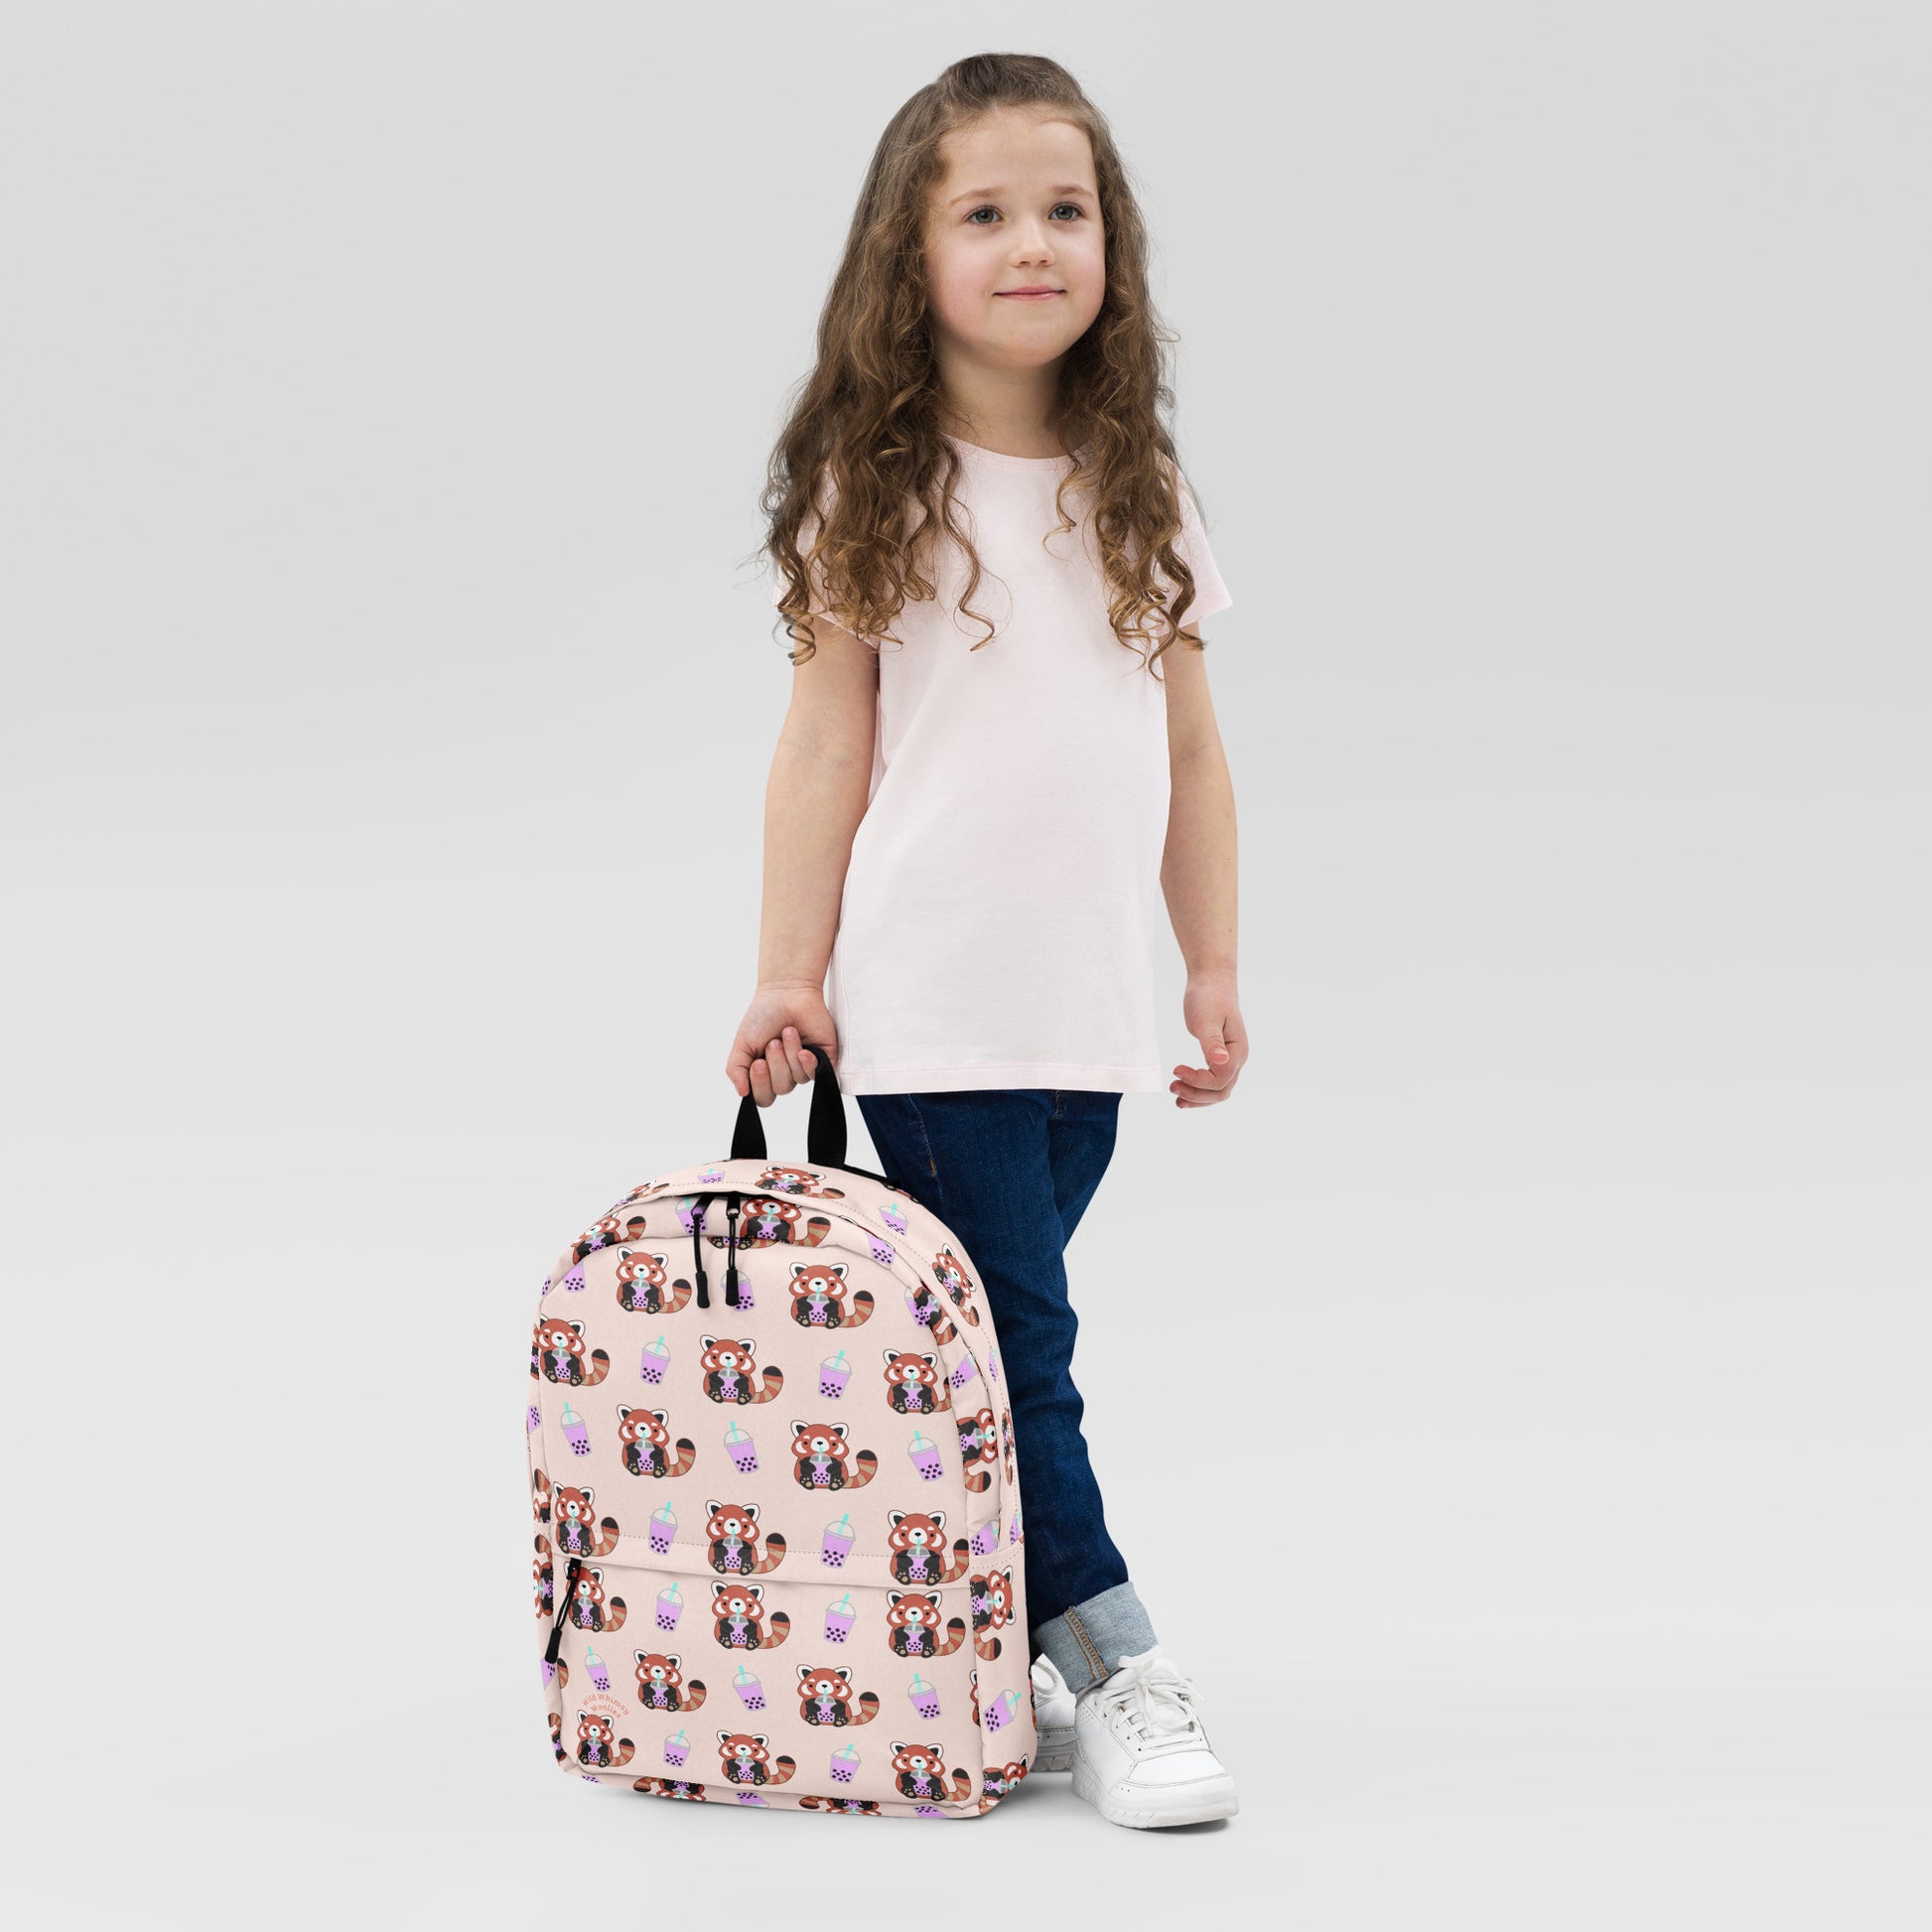 The Backpack Tote in Wild Child